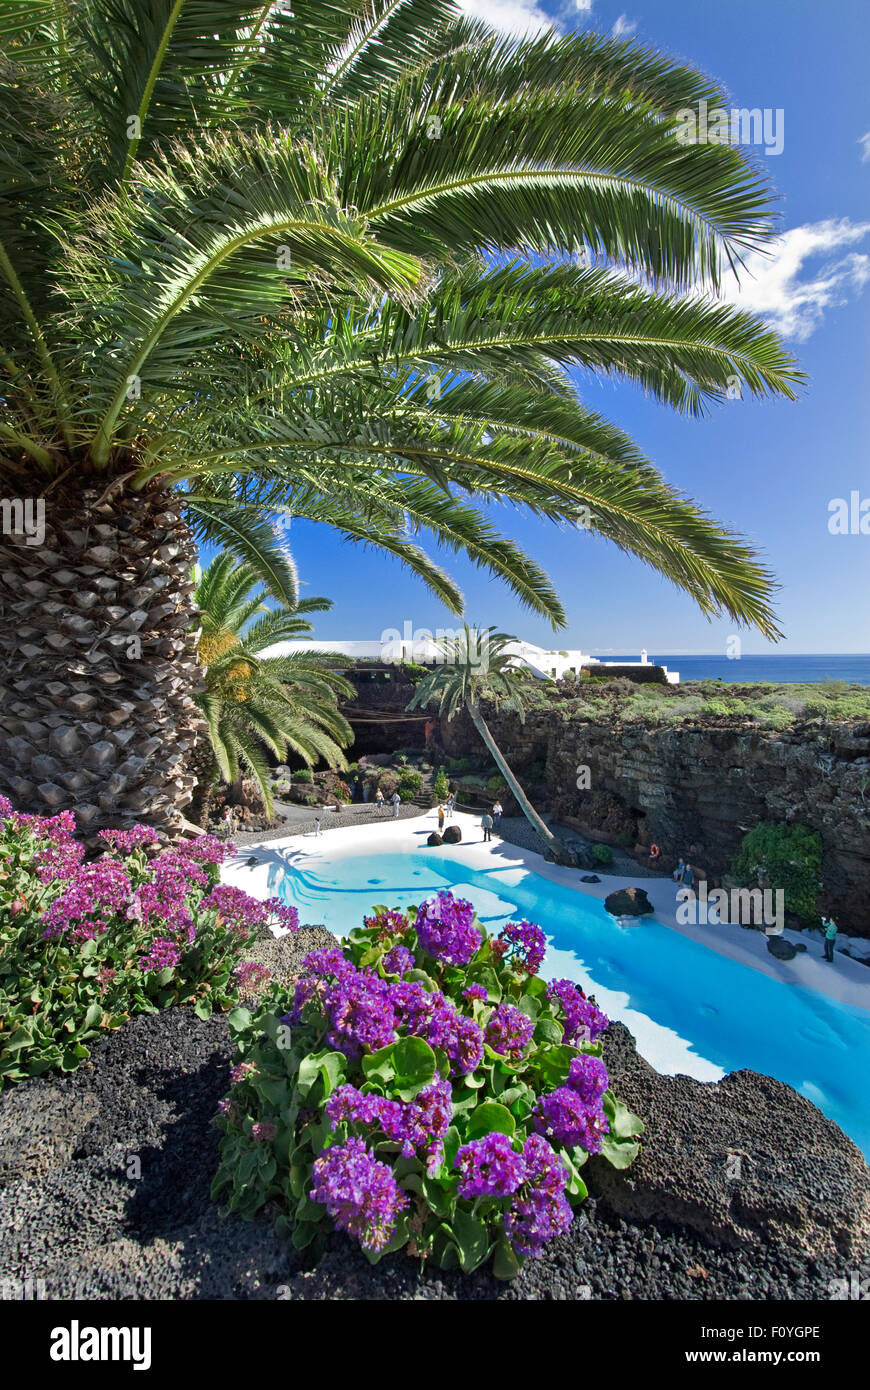 Jameos del Agua LANZAROTE Pool with palms and tropical plants with typical volcanic rock Lanzarote Canary Islands Spain Stock Photo